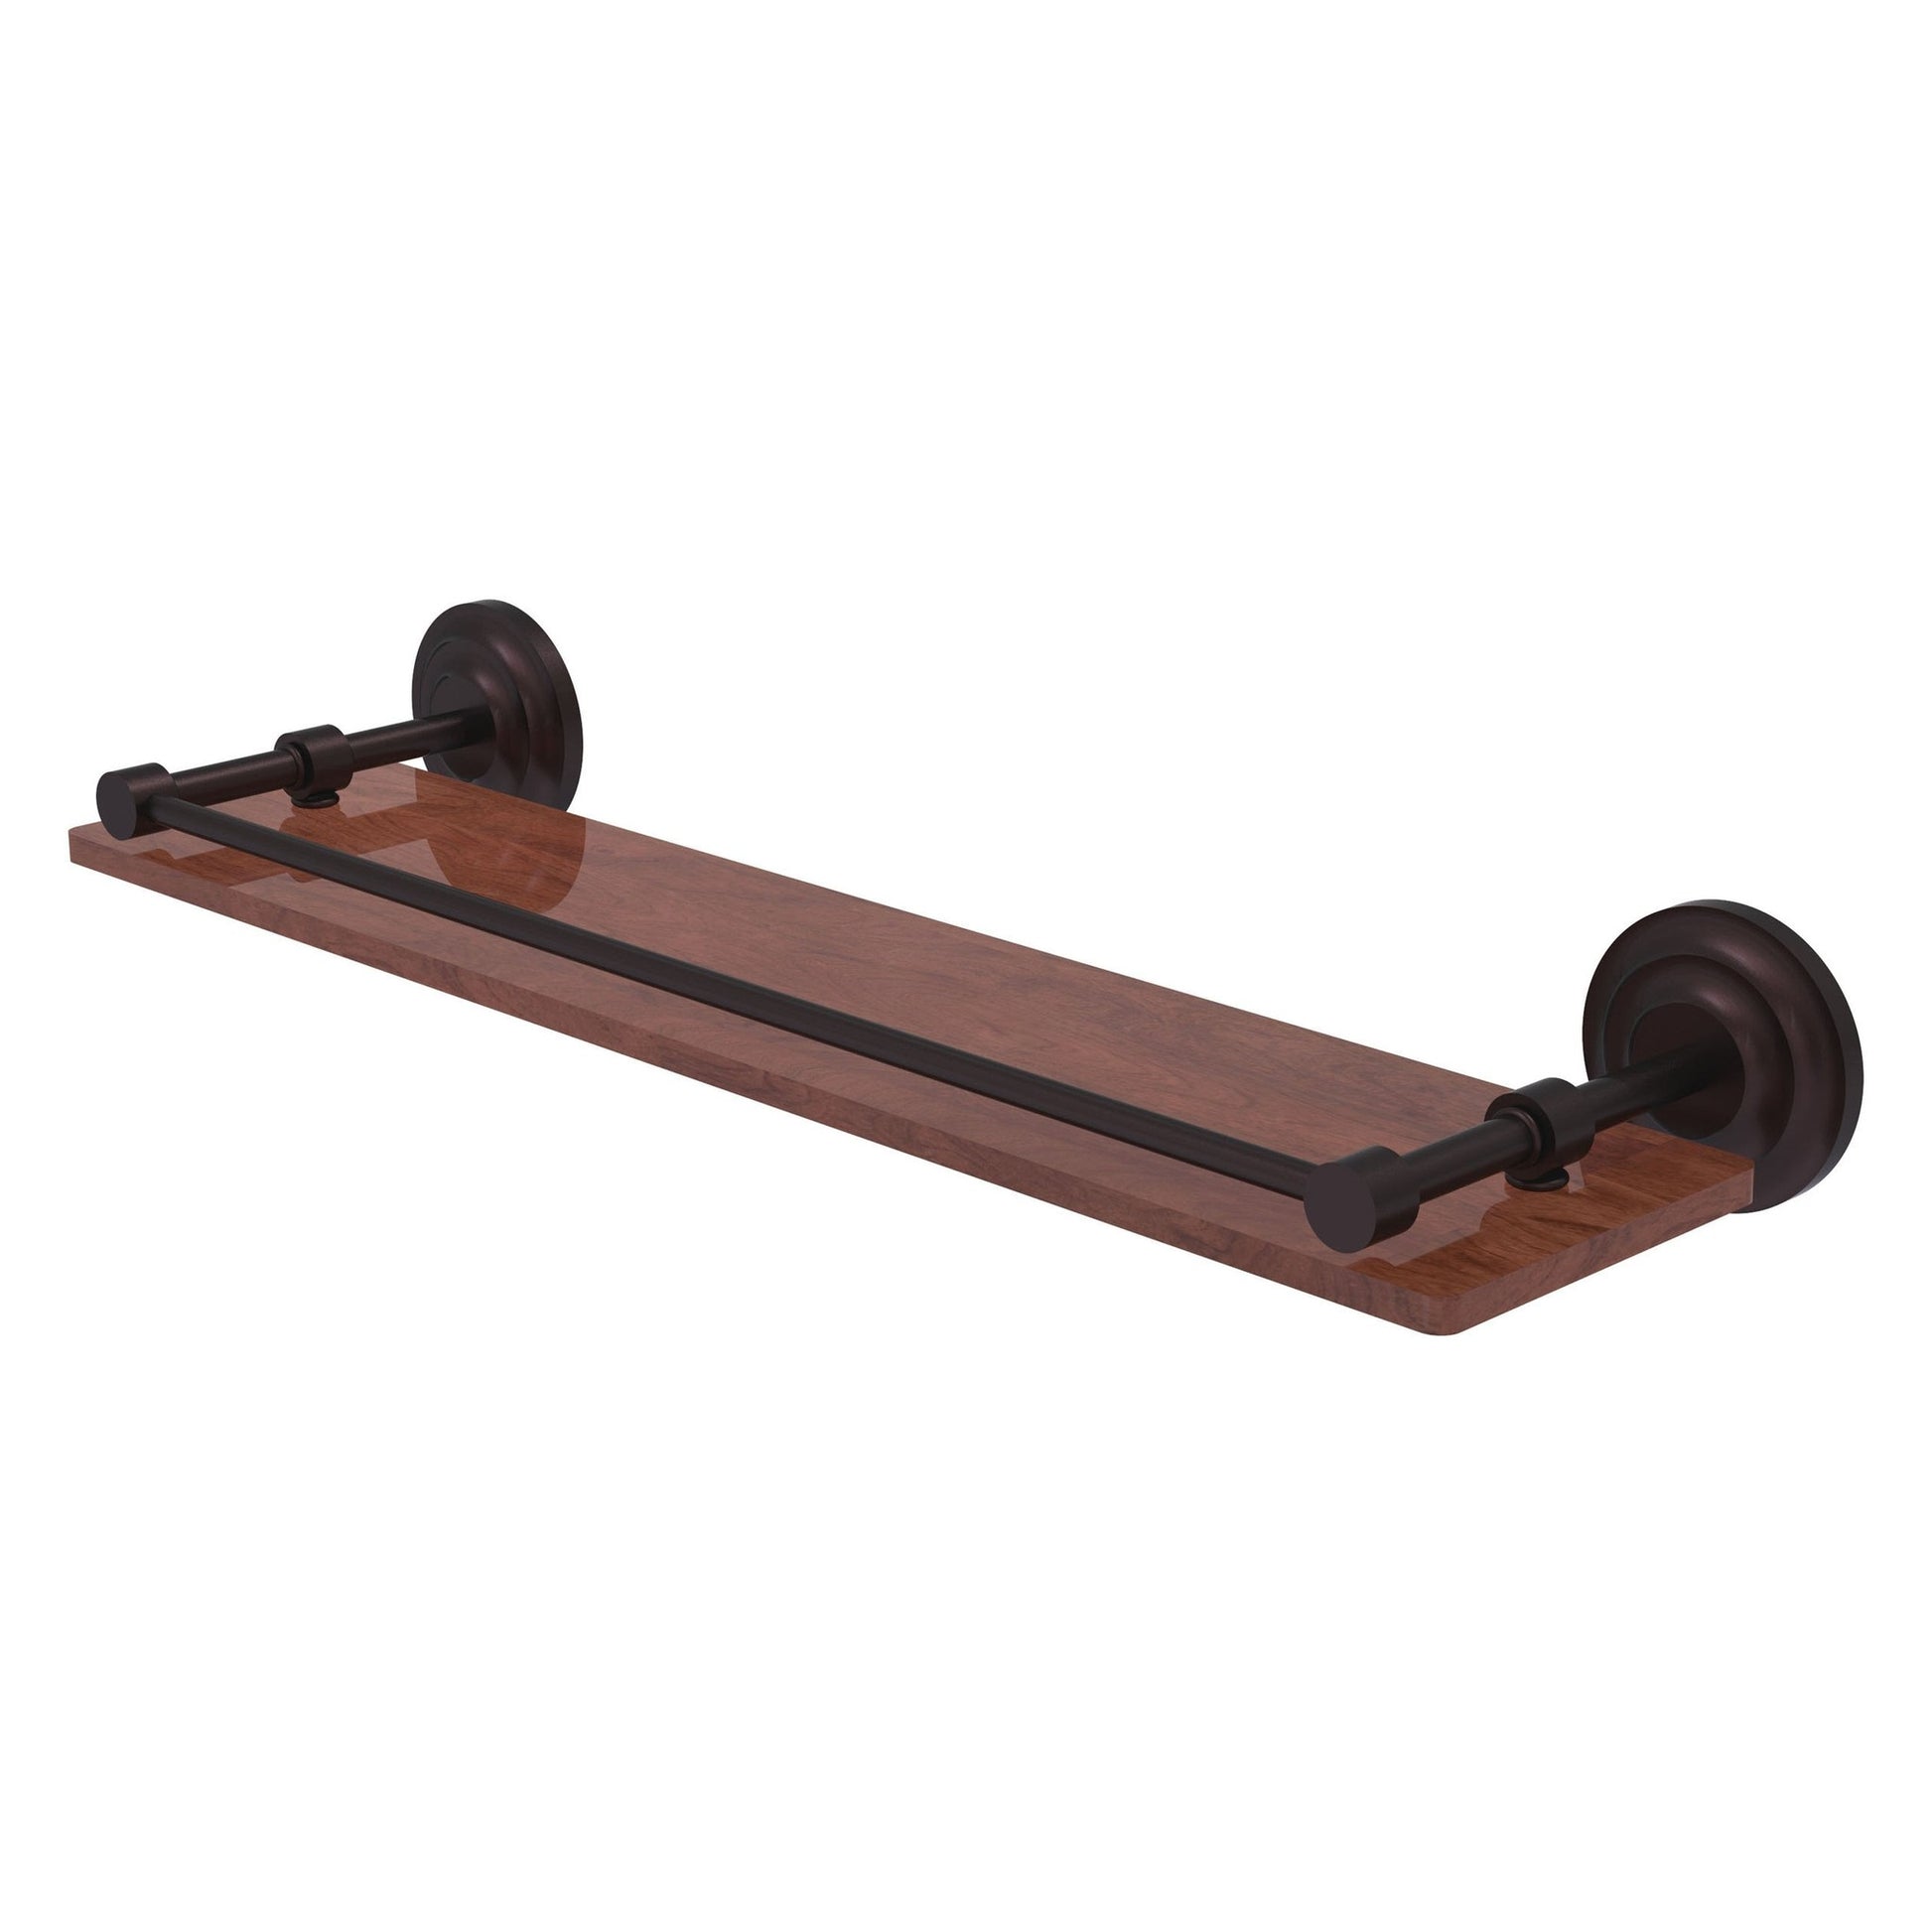 Allied Brass Que New 22" x 5" Antique Bronze Solid Brass 22-Inch Solid IPE Ironwood Shelf With Gallery Rail